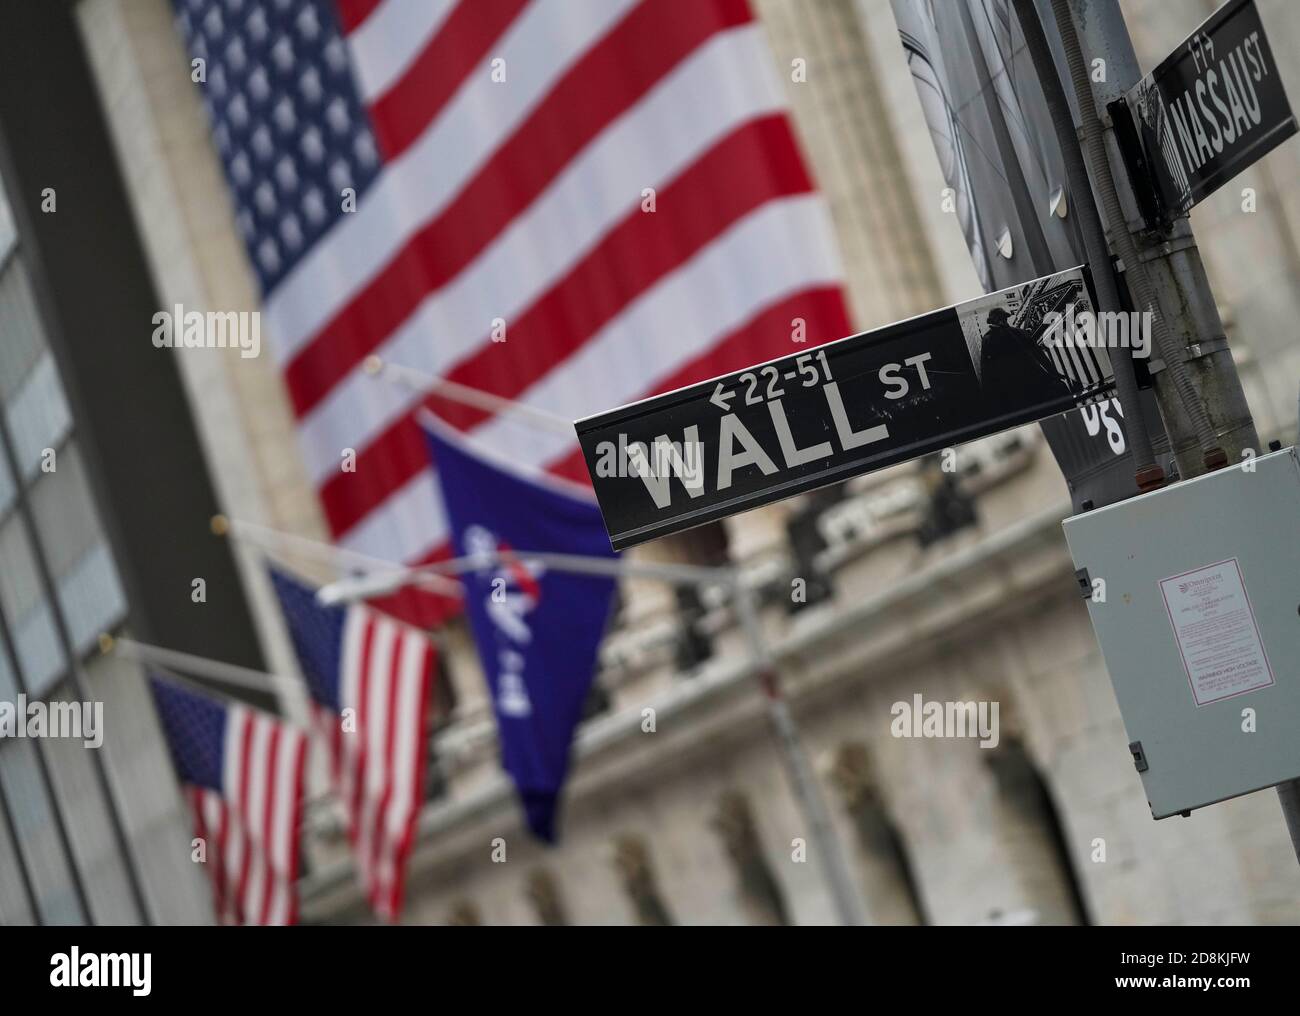 New York, USA. 30th Oct, 2020. A road sign is seen nearby the New York Stock Exchange in New York, the United States, Oct. 30, 2020. U.S. stocks closed lower on Friday, as a pronounced slide in tech sector weighed on the market. The Dow Jones Industrial Average fell 157.51 points, or 0.59 percent, to 26,501.60. The S&P 500 was down 40.15 points, or 1.21 percent, to 3,269.96. The Nasdaq Composite Index shed 274.00 points, or 2.45 percent, to 10,911.59. Credit: Wang Ying/Xinhua/Alamy Live News Stock Photo